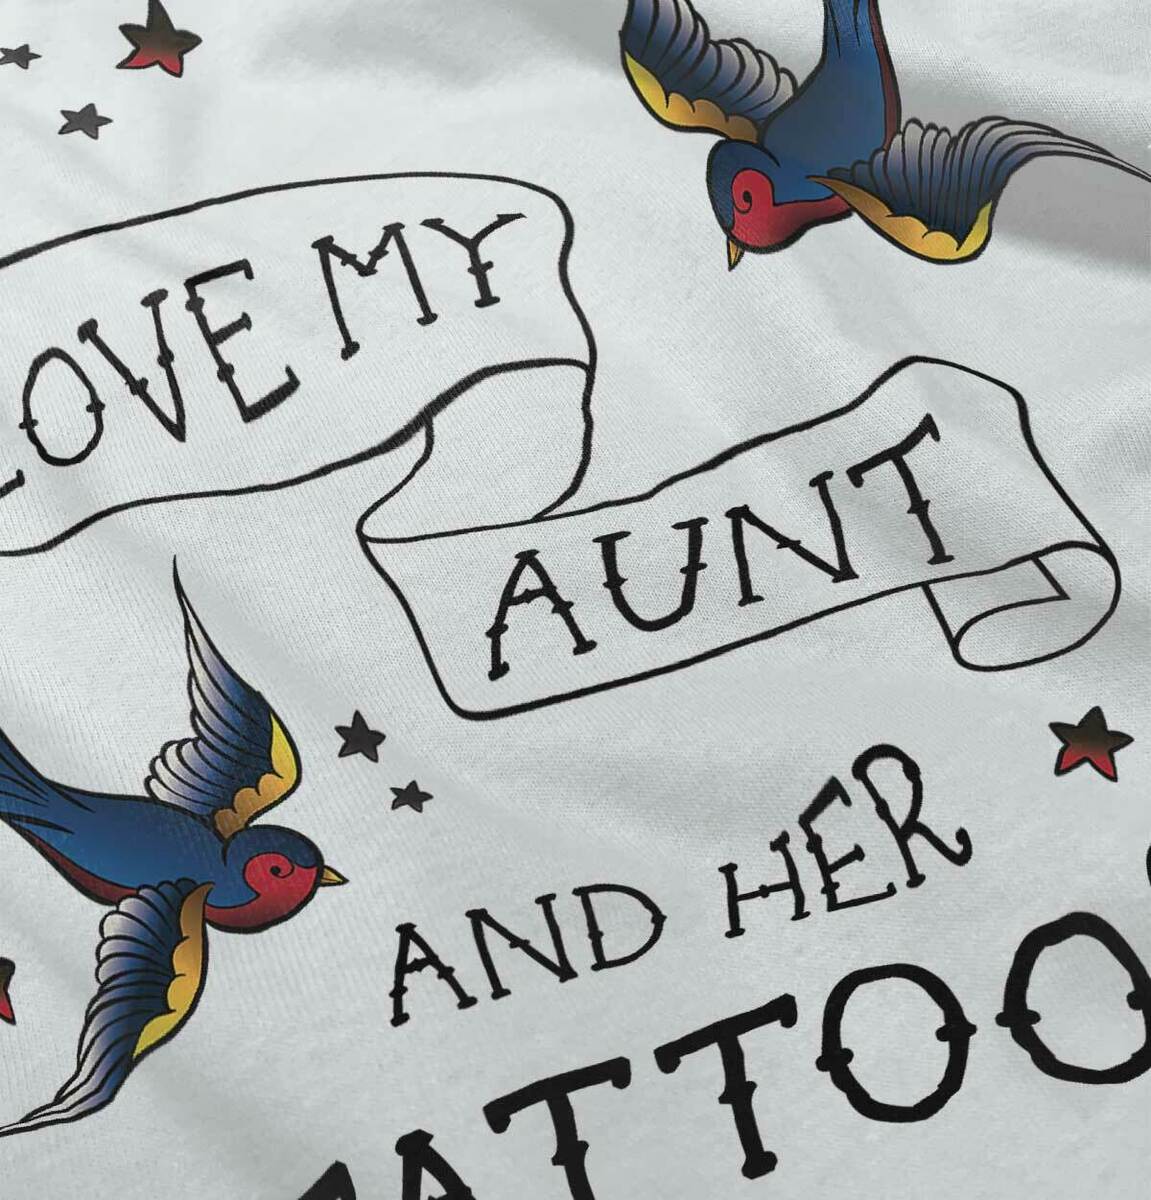 andrew wyse recommends aunt and nephew tattoos pic